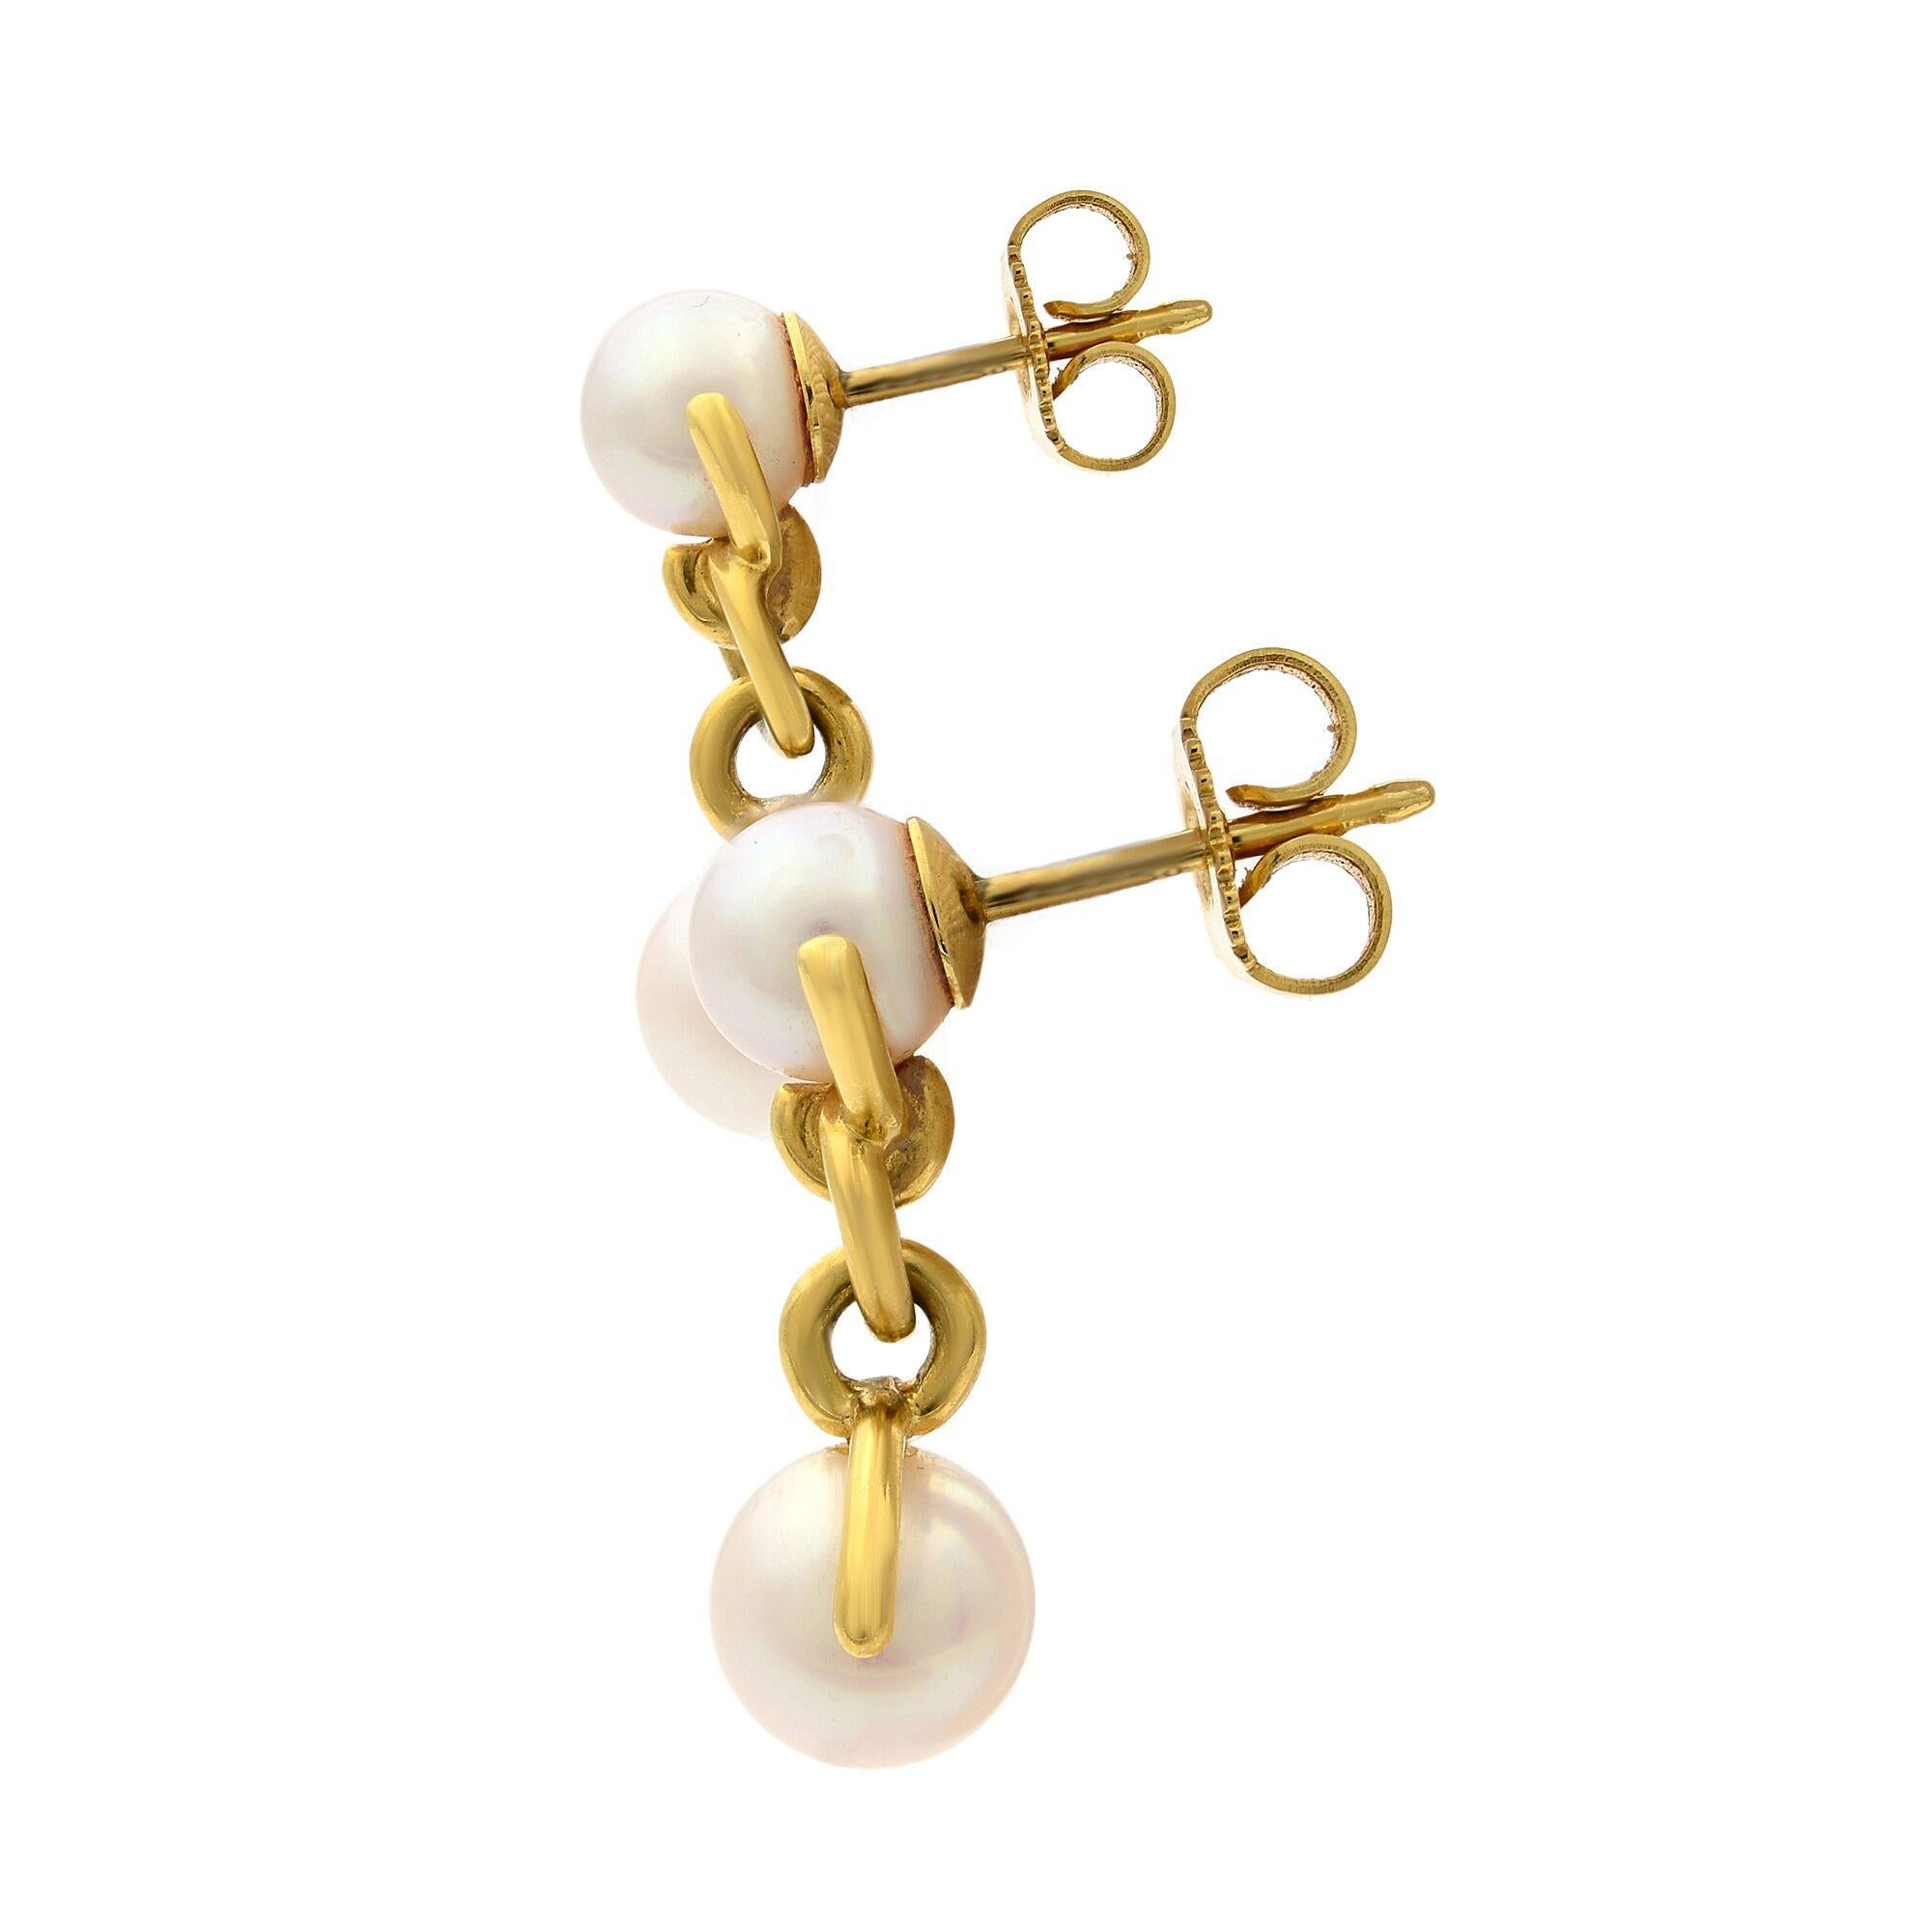 Beautiful Tiffany & Co. 18K yellow gold drop earrings featuring cultured pearls and clutch back closures. Both earrings stamped T&CO 750 and closure backs also stamped T&CO 750. Each earring is 19mm long. Condition is pre-owned but looks great.